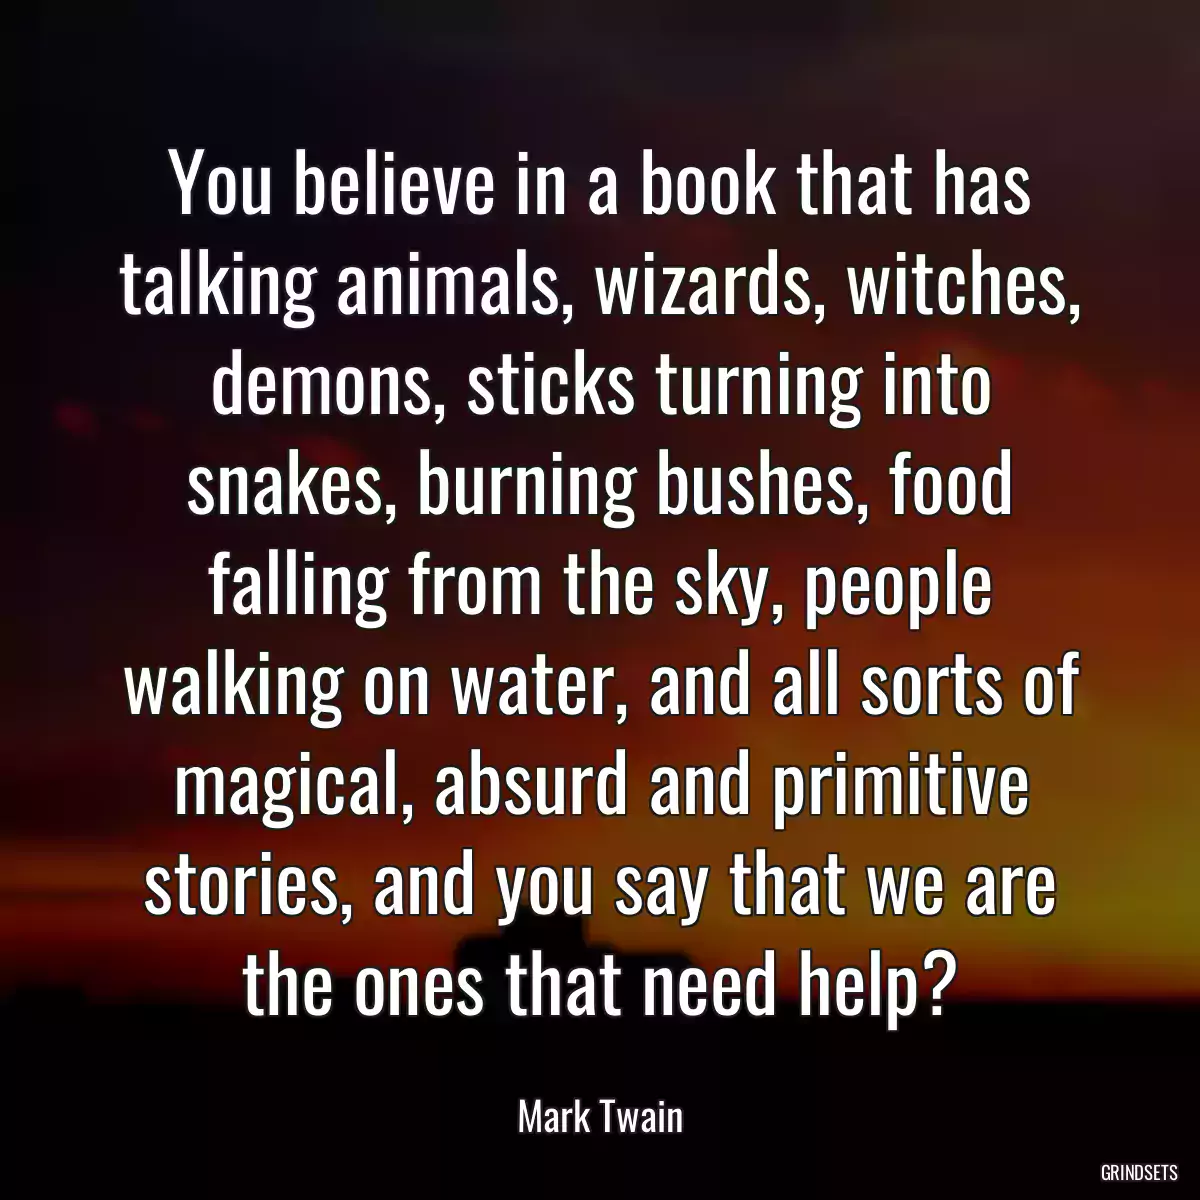 You believe in a book that has talking animals, wizards, witches, demons, sticks turning into snakes, burning bushes, food falling from the sky, people walking on water, and all sorts of magical, absurd and primitive stories, and you say that we are the ones that need help?